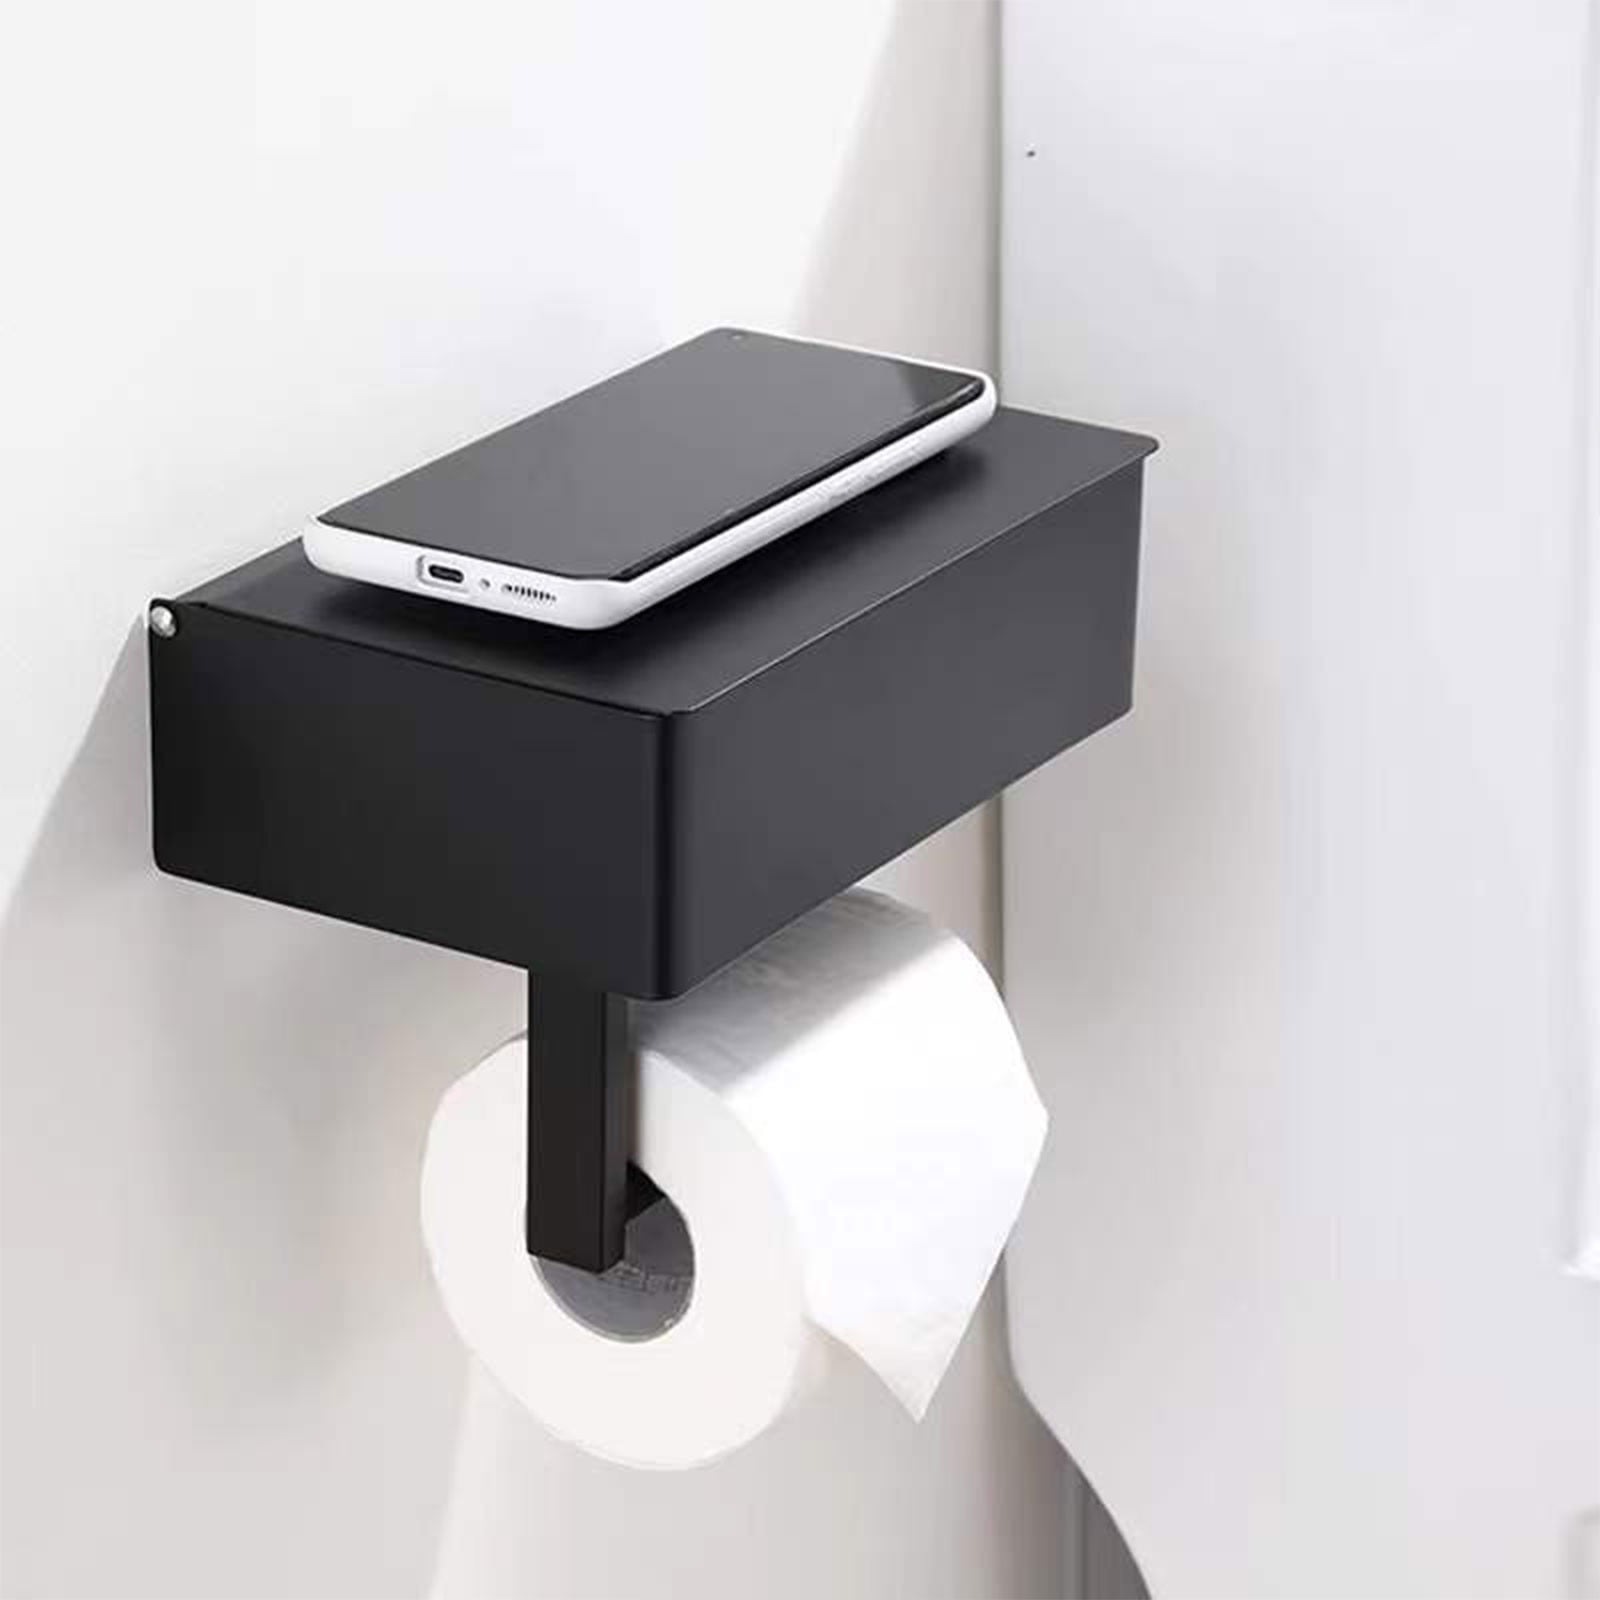 Adhesive Toilet Paper Roll Holder 304 Stainless Steel Wall Mounted Tissue  Towel Bath Ball Holder Rack for Kitchen Bathroom